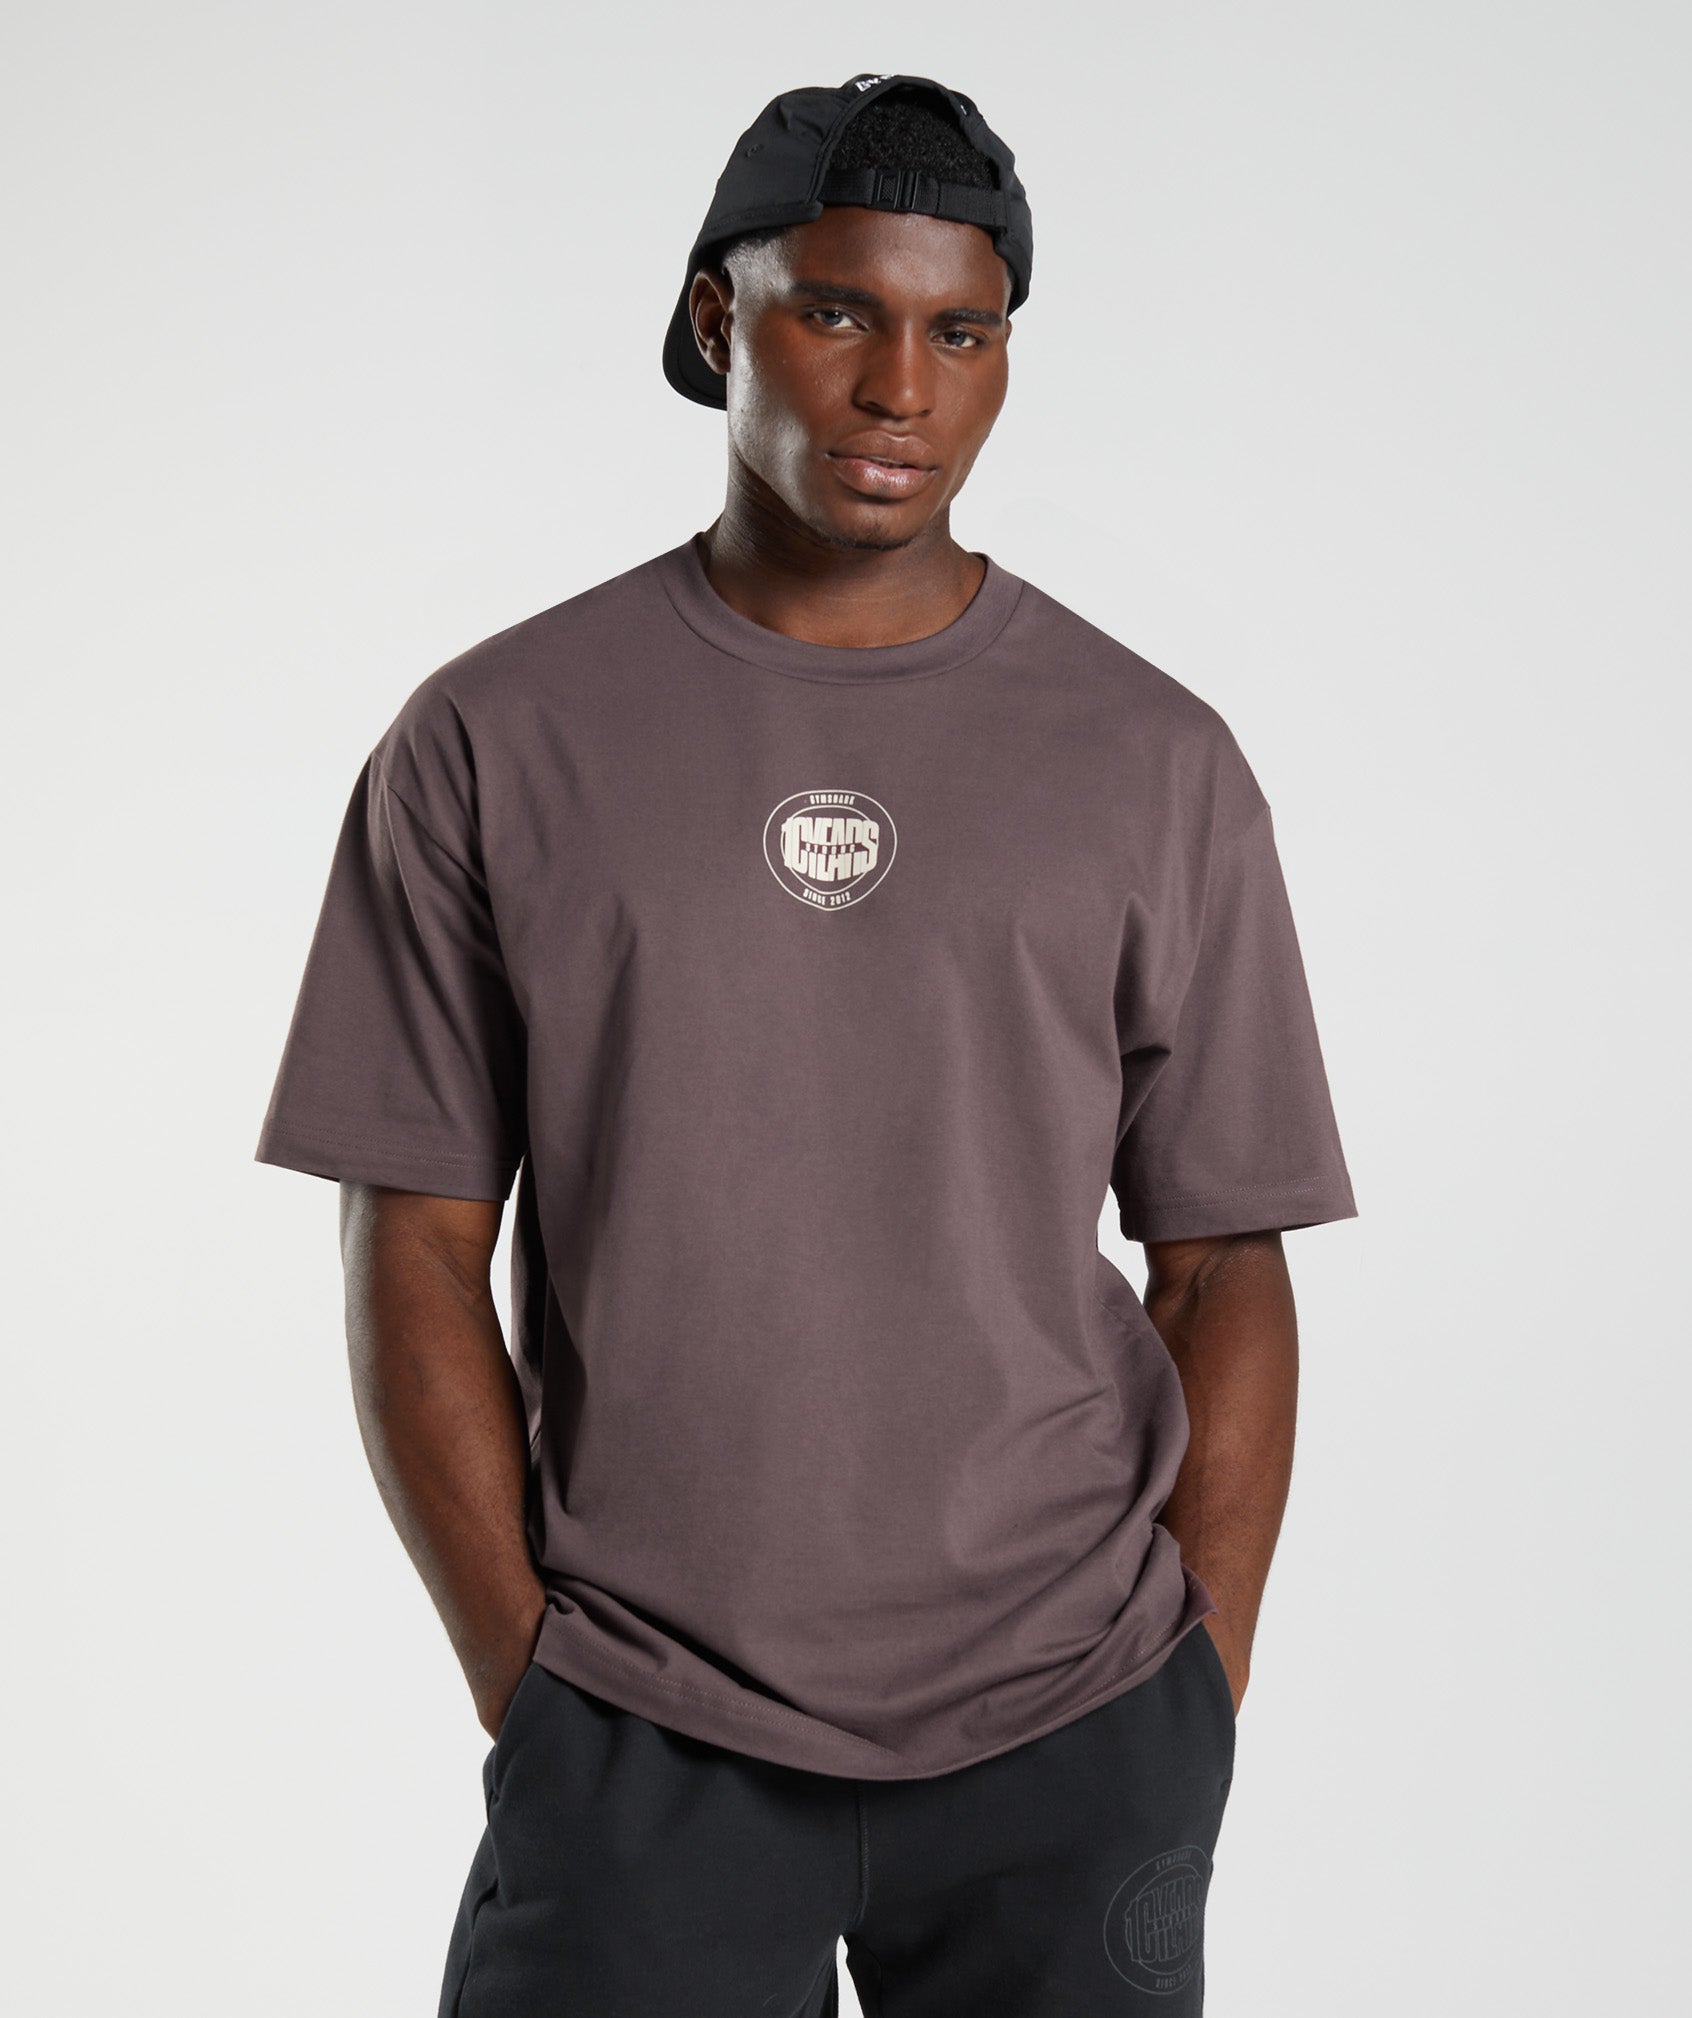 GS10 Year Oversized T-Shirt in Chocolate Brown - view 1